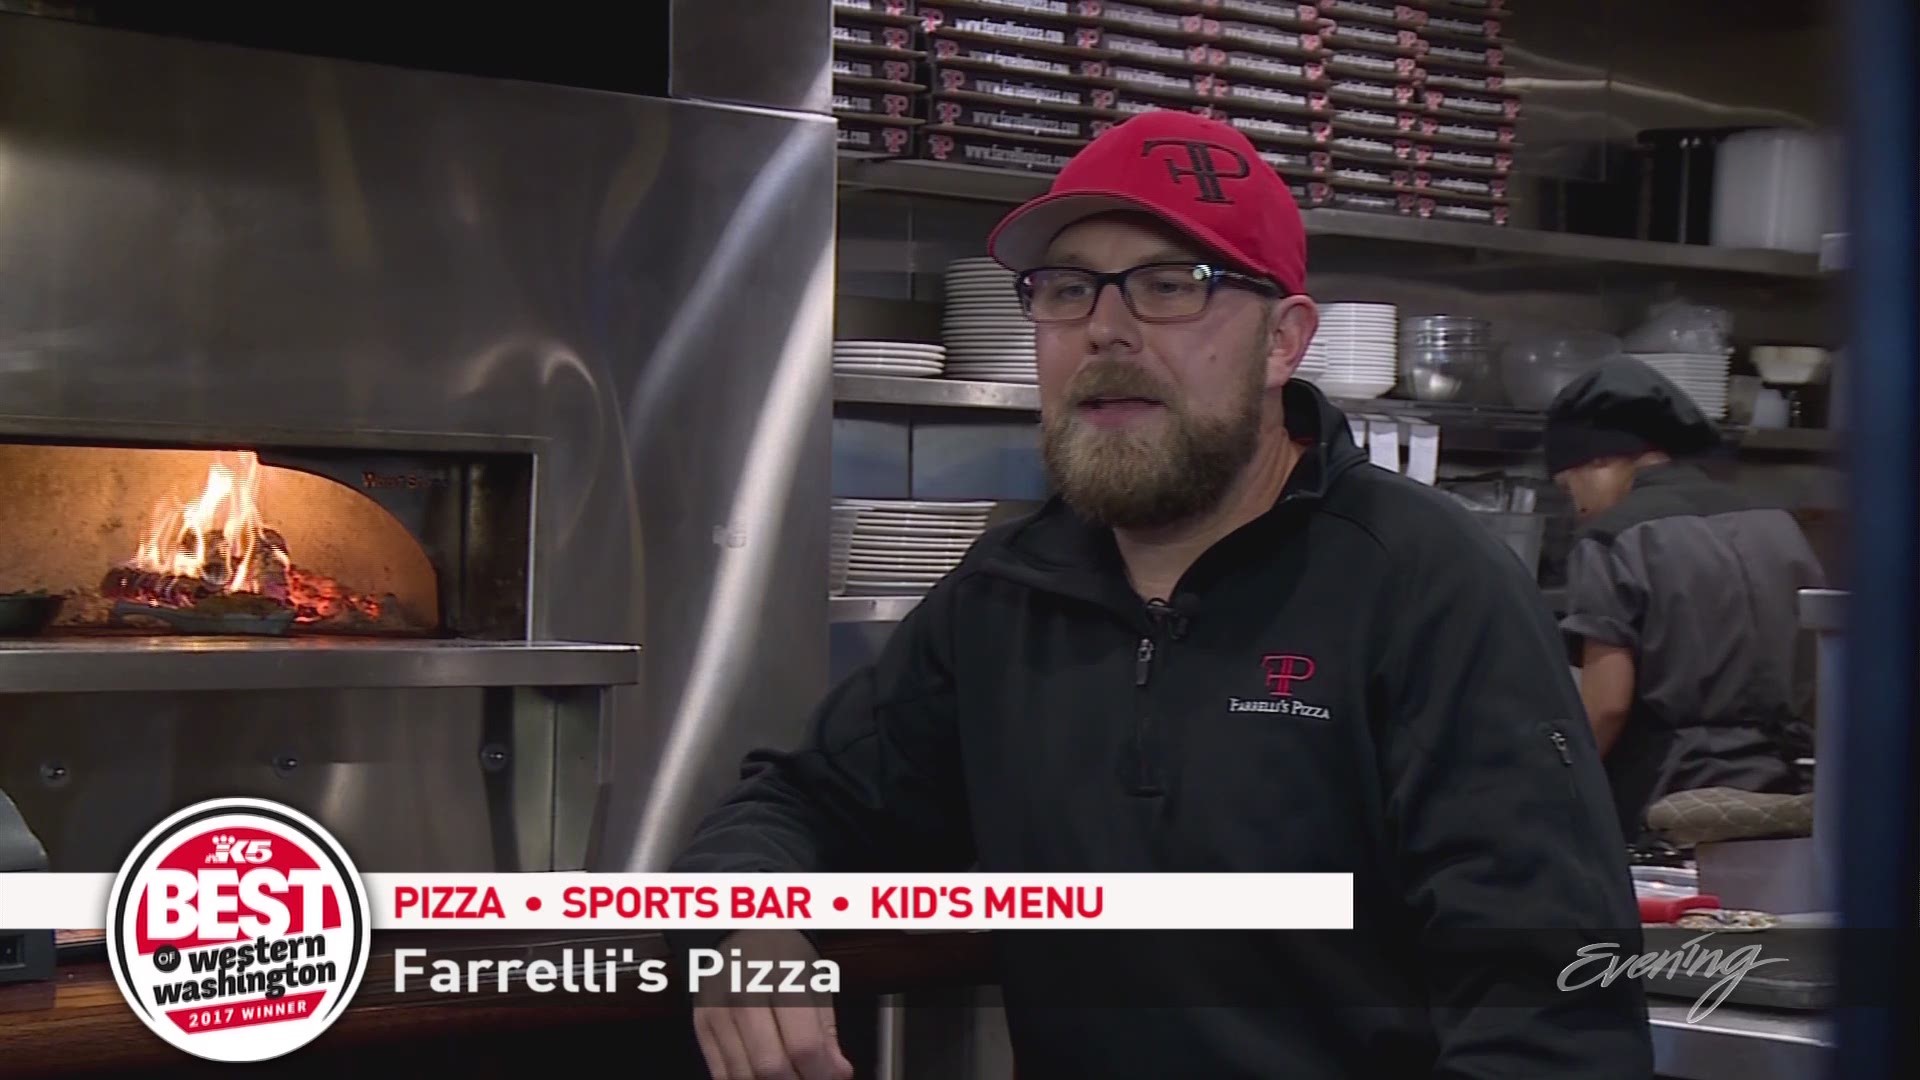 Our winner for Best Pizza is a familiar name in the South Sound. Farrelli's Pizza has won for the third straight year.  You might guess the secret to Farrelli's Pizza's success is the wood stone ovens, but the secret may have less to do with the flame and